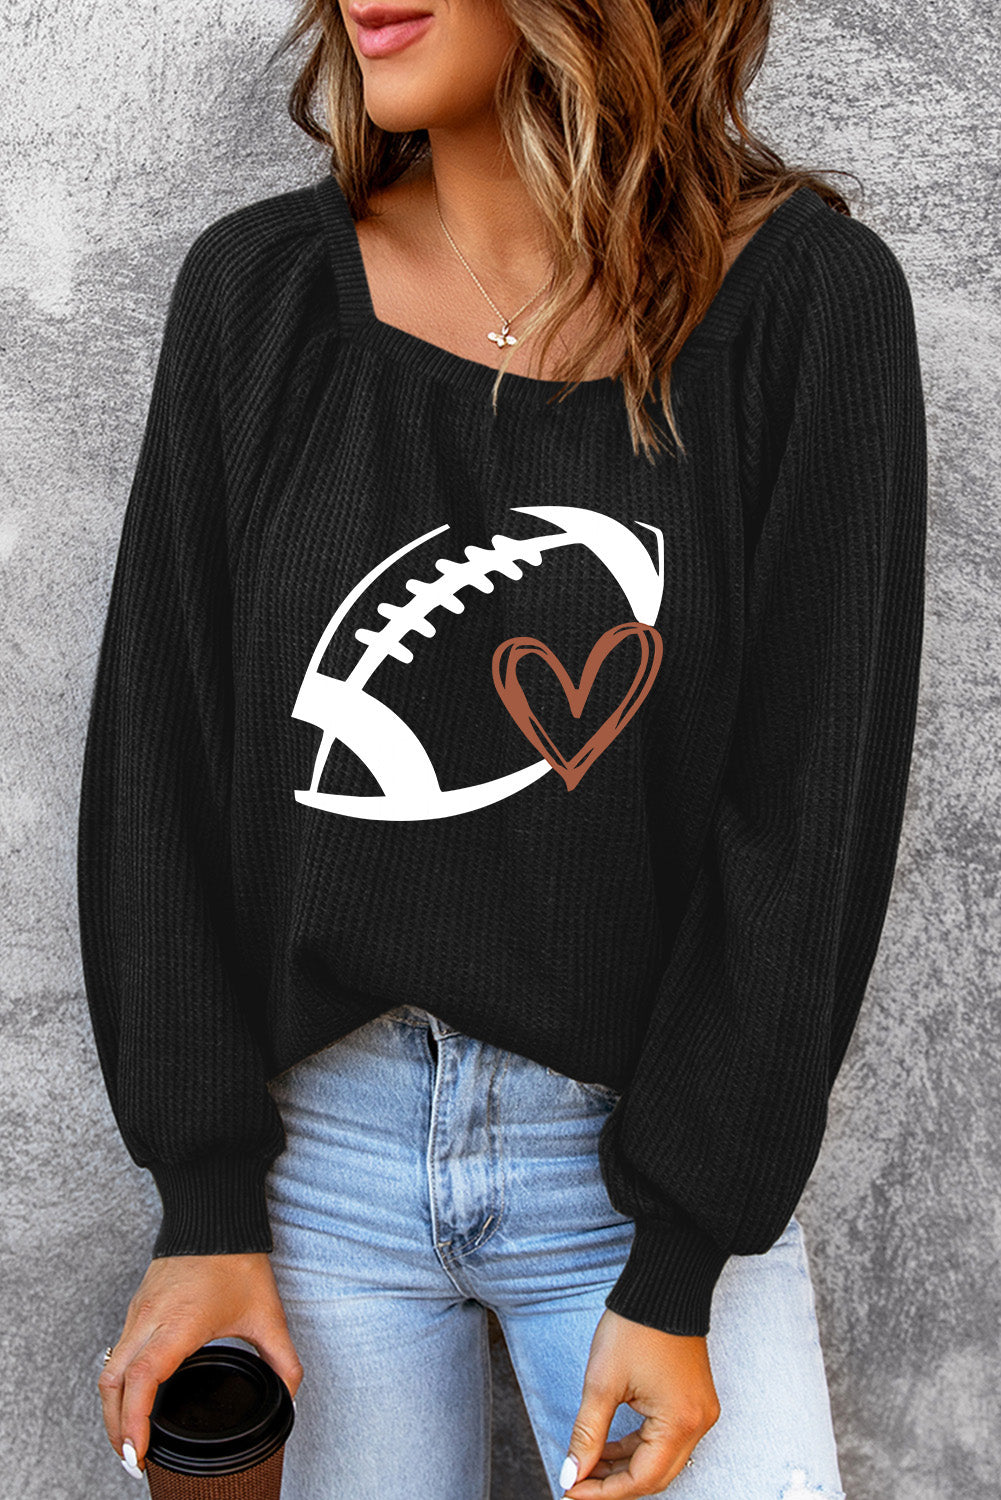 Football Love Graphic Ribbed Top - ONLINE EXCLUSIVE